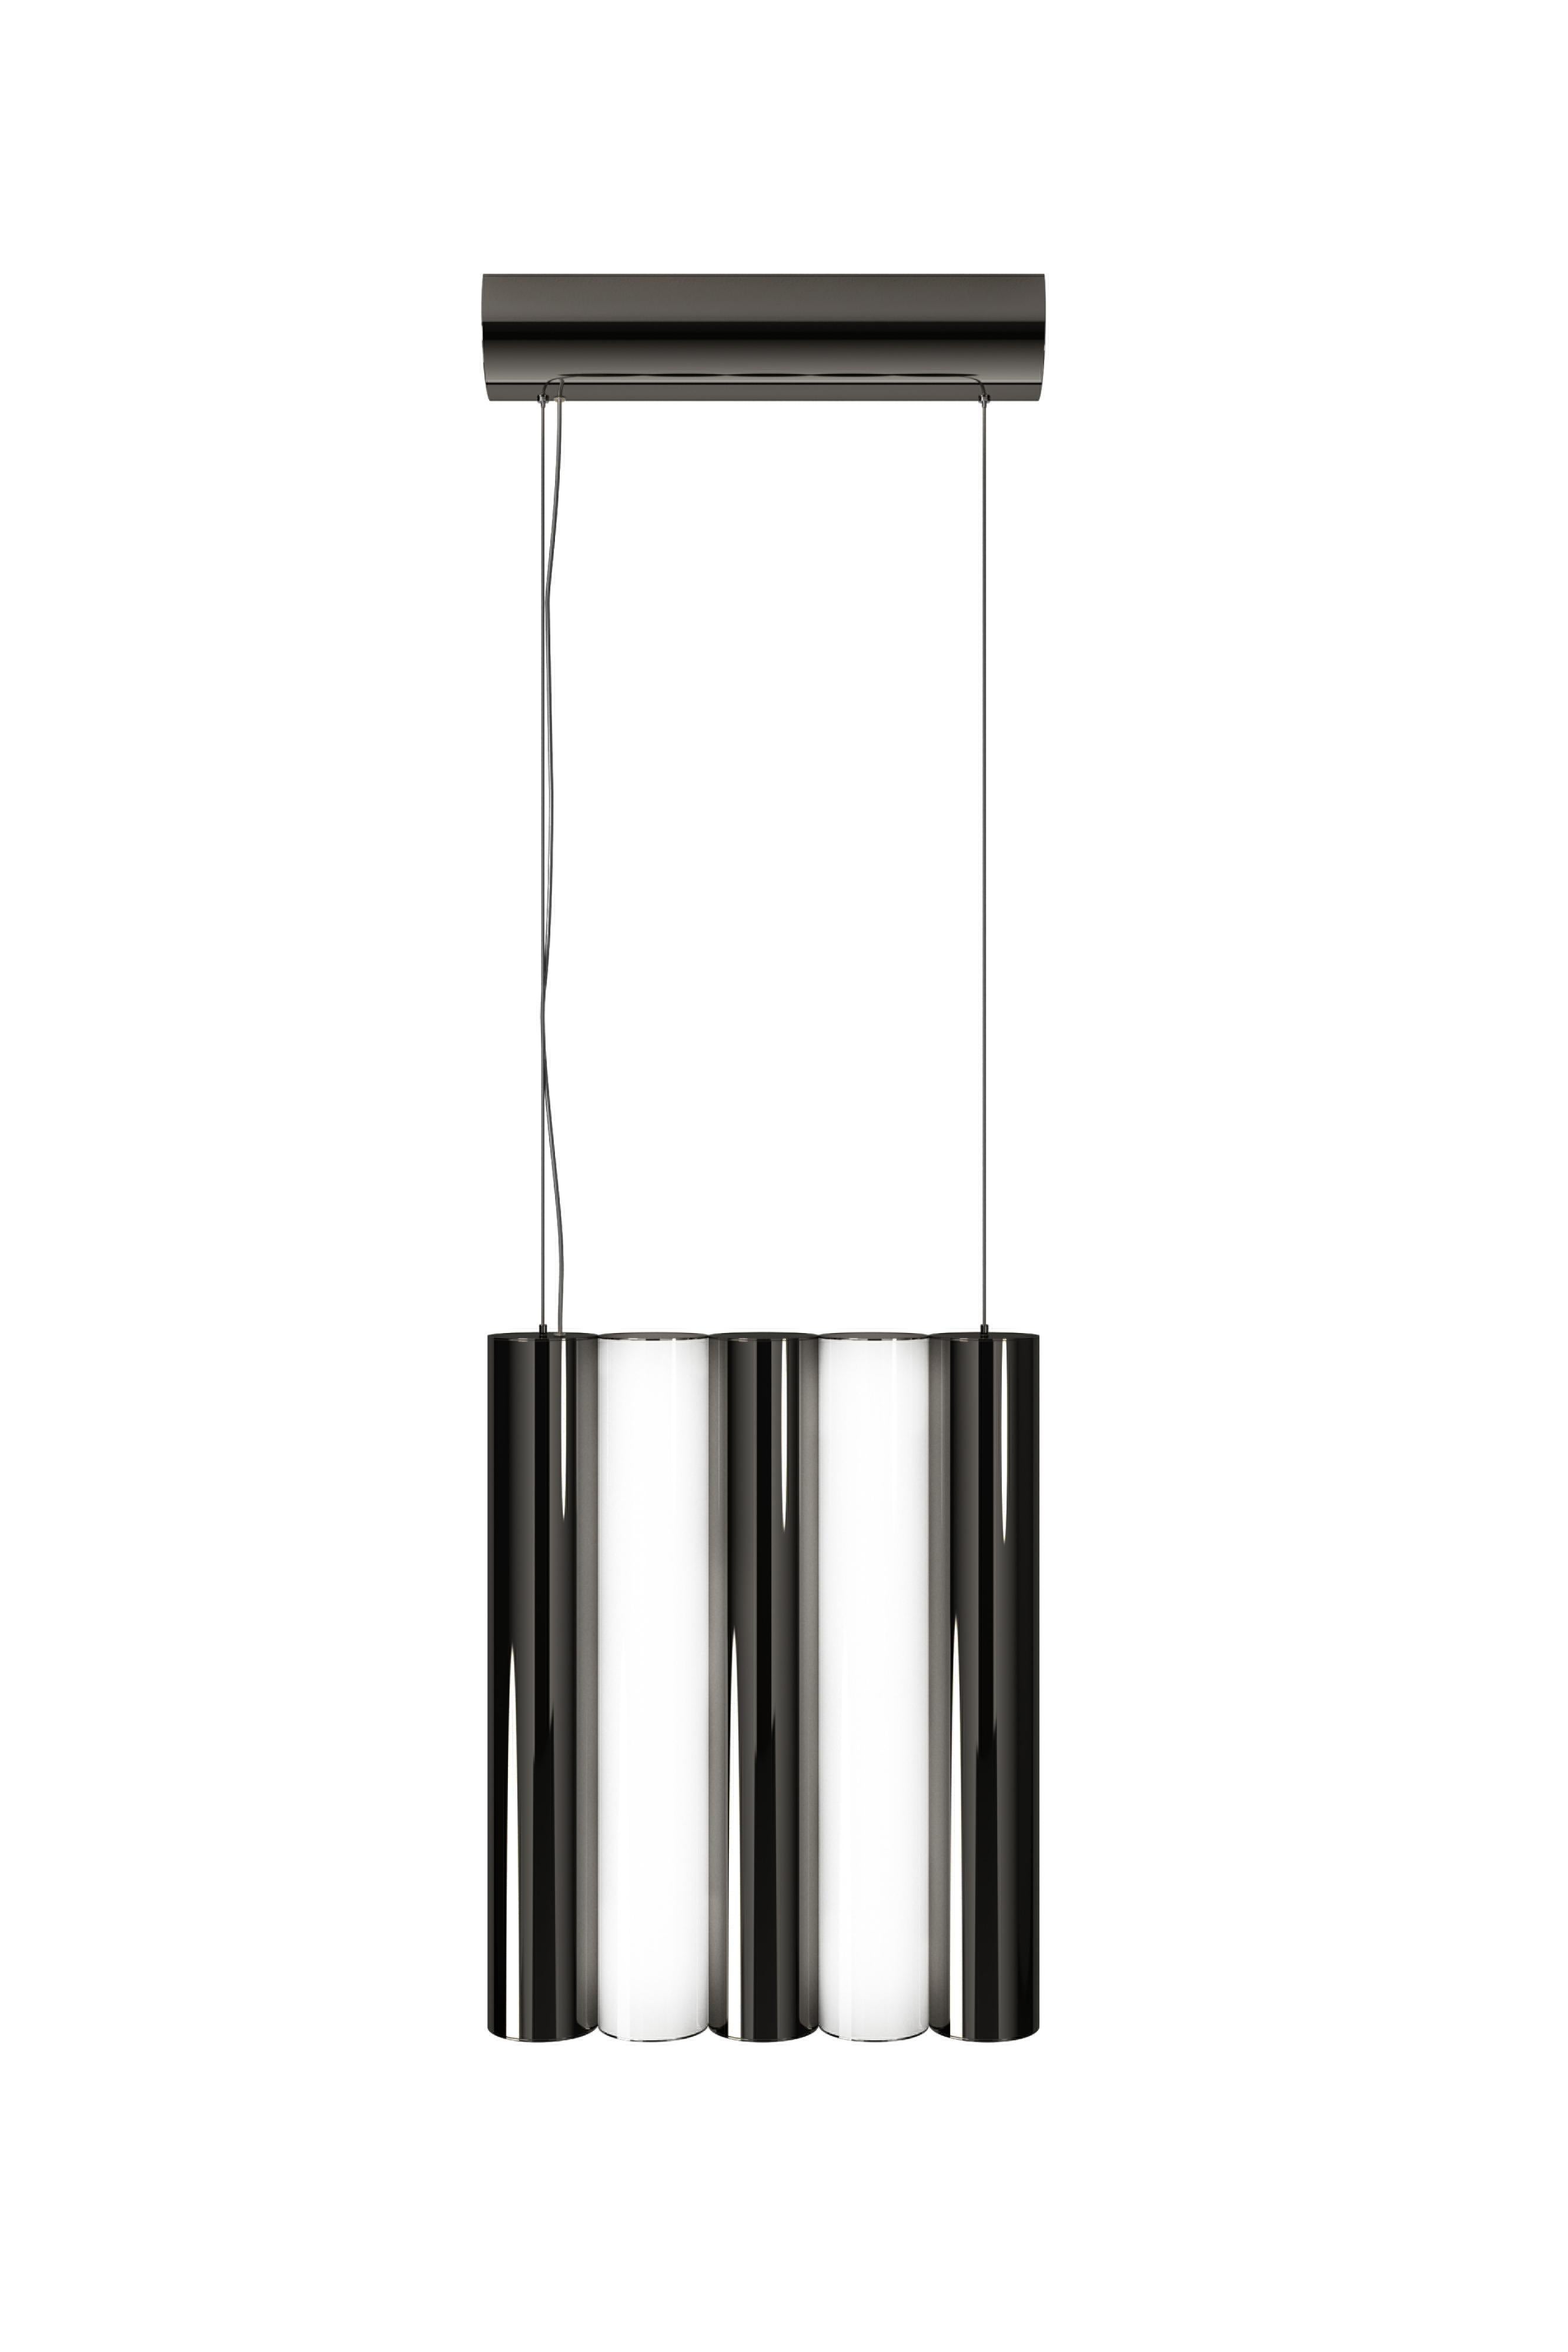 Gamma L5 Brass pendant by Sylvain Willenz
Dimensions: D25 x W5 X H42.3 cm
Materials: Solid brass, White Polycarbonate diffuser ,Metal cable and transparent electric cable.
Others finishes and dimensions are available.

All our lamps can be